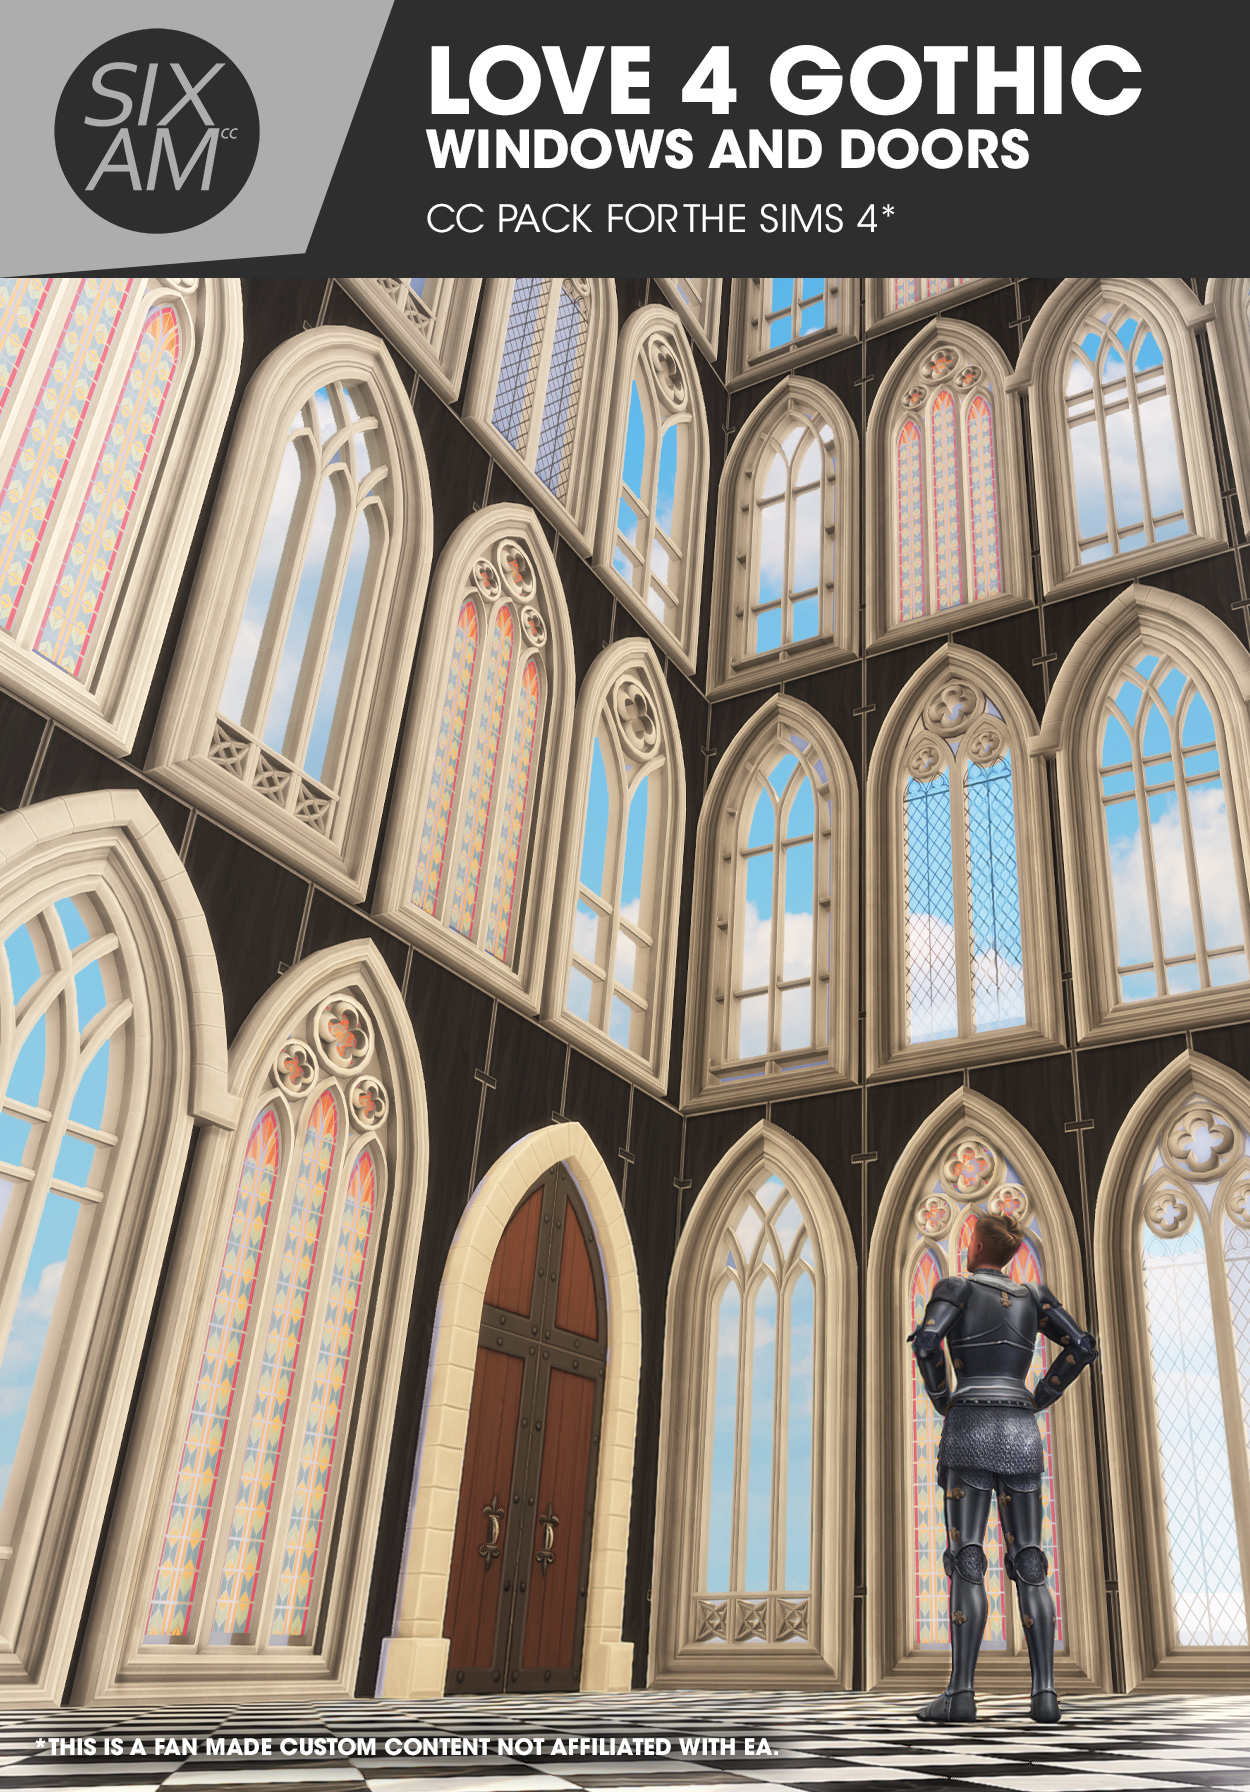 Love for Gothic Windows and Doors (CC Pack for The Sims 4)